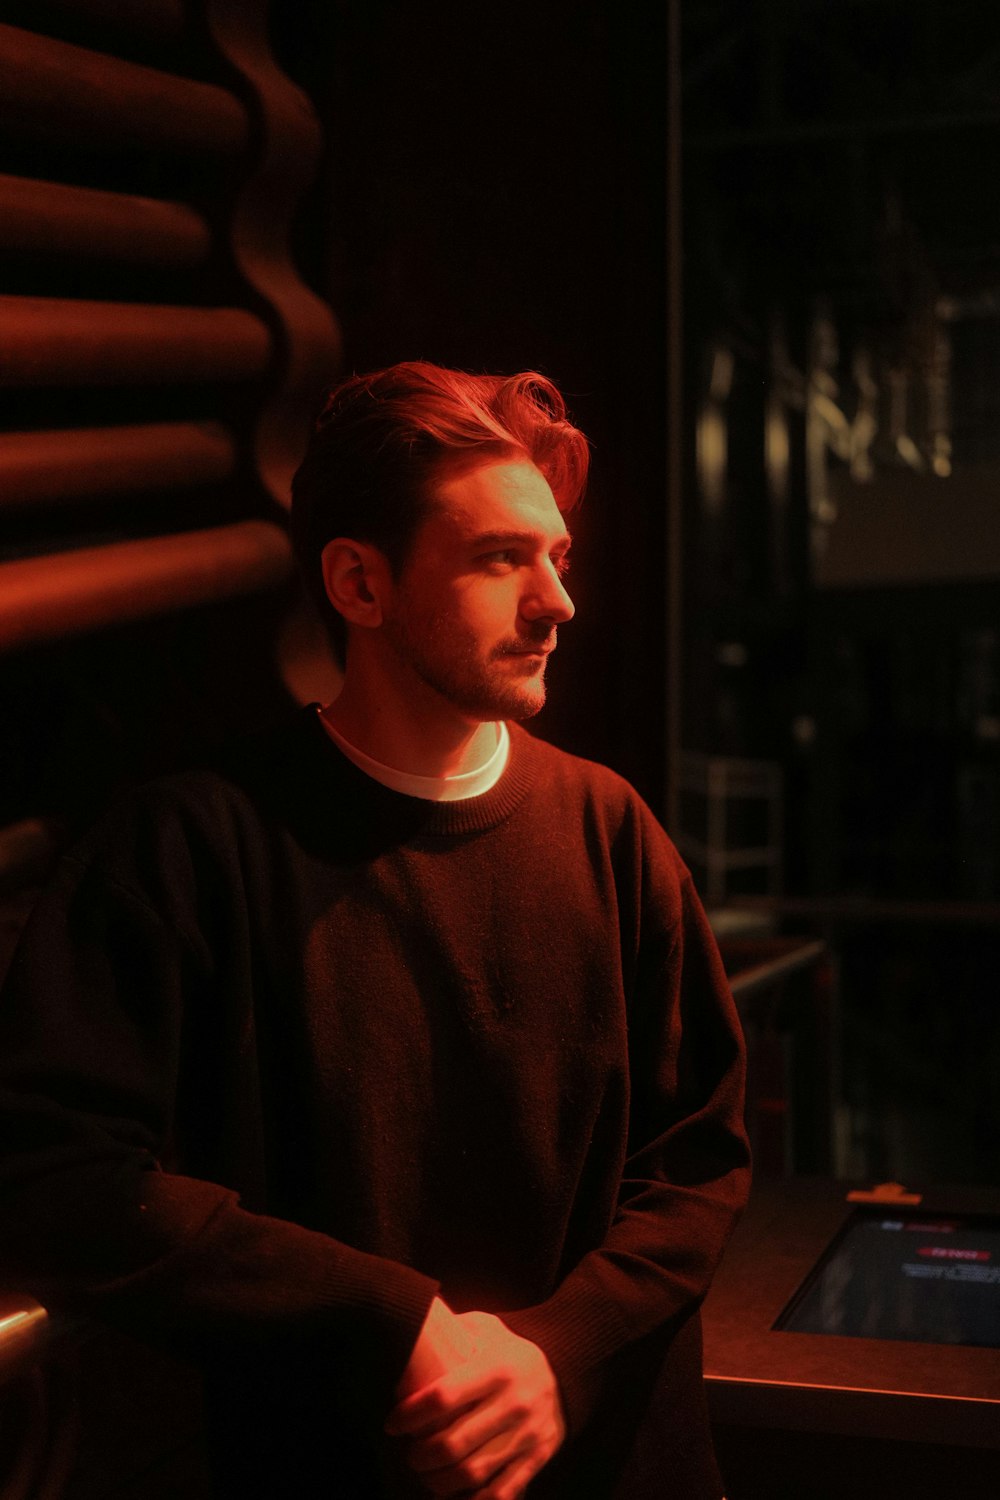 a man with red hair sitting in a dark room